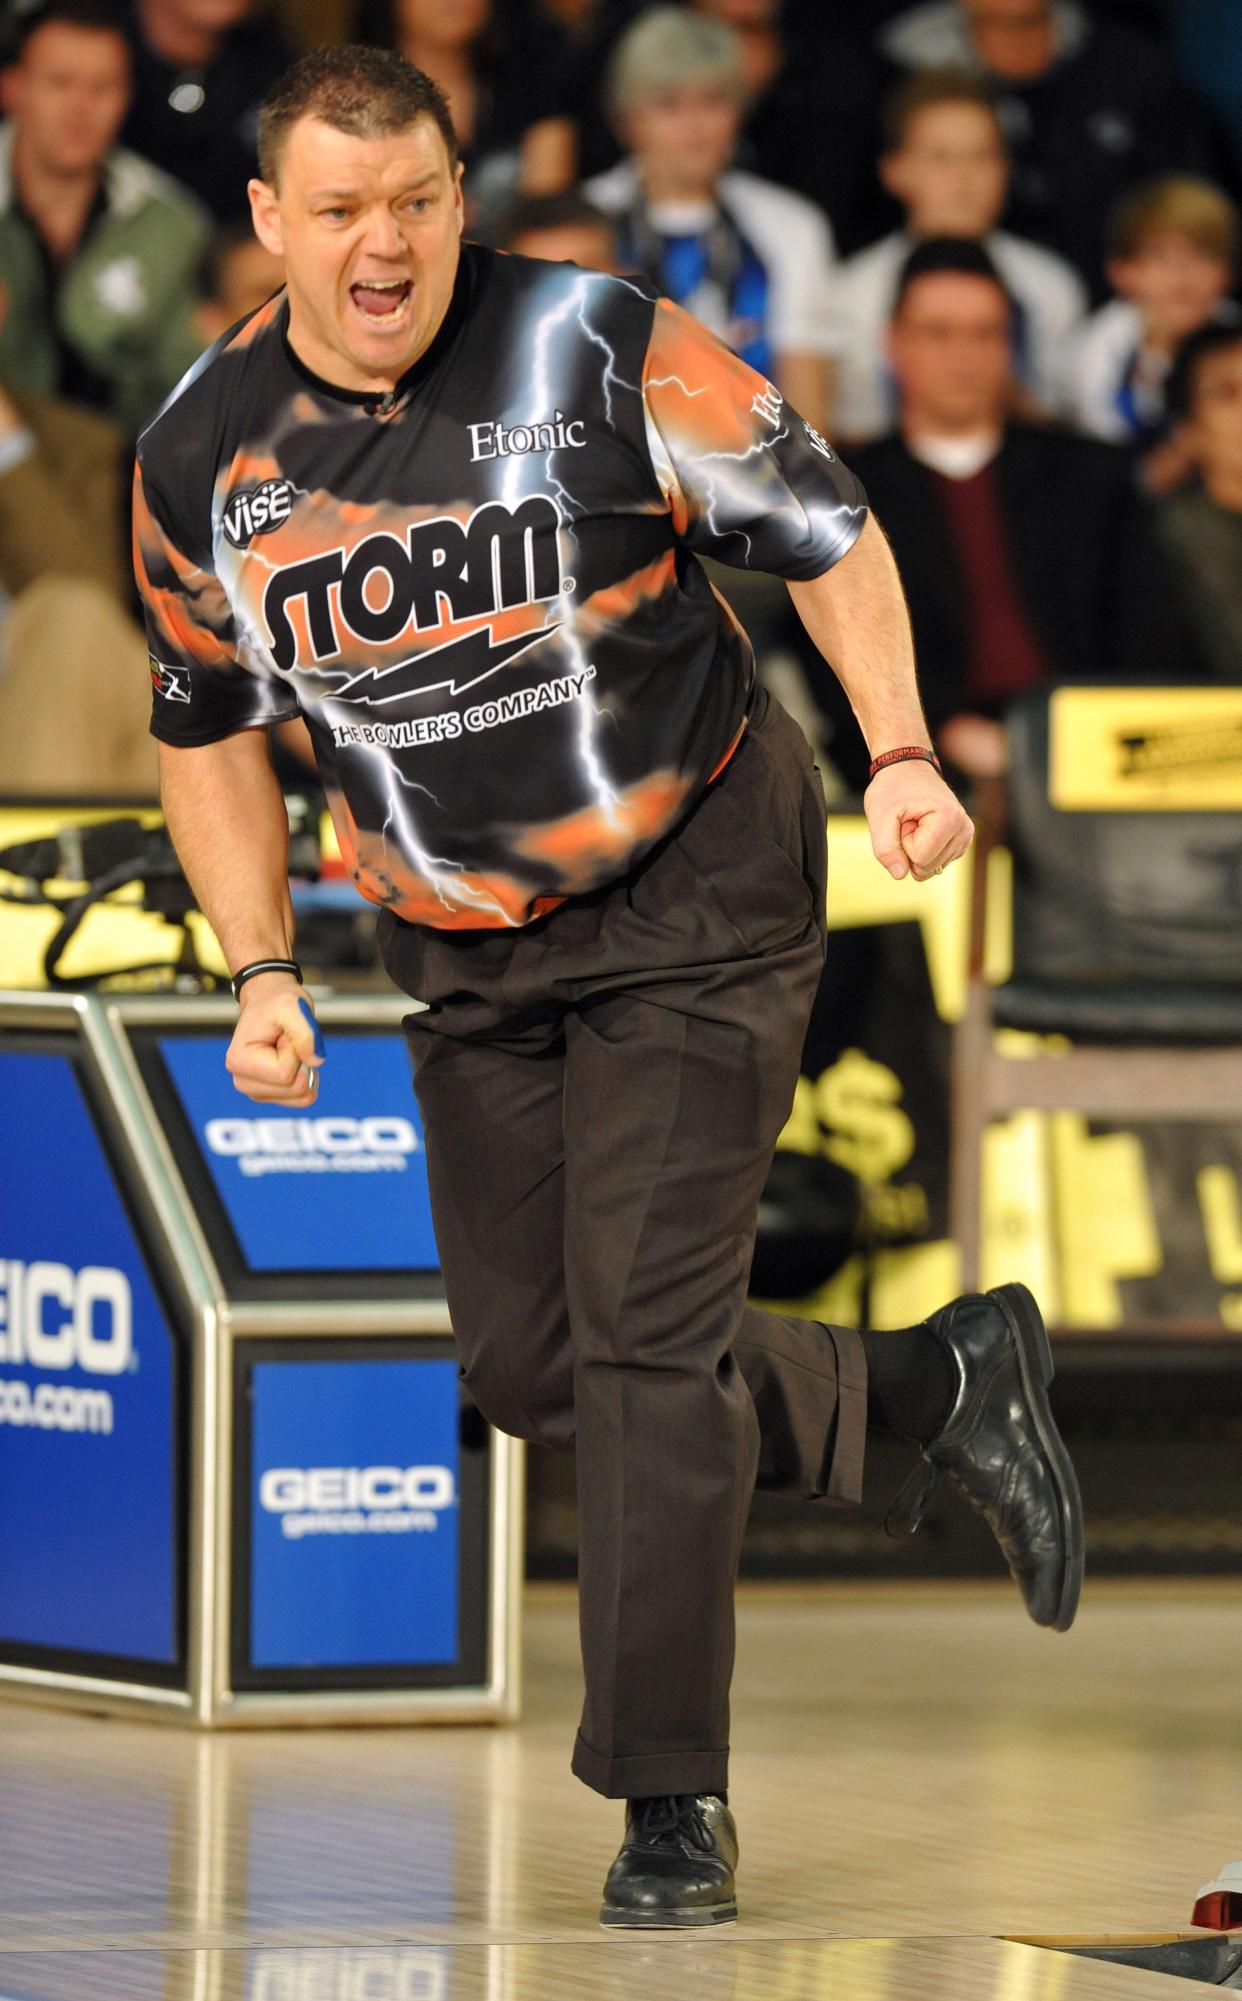 Tom Hess of Granger, Iowa, shouts after a strike that defeated Jack Jurek to win the USBC Masters in Reno, Nev., on February 13, 2011.